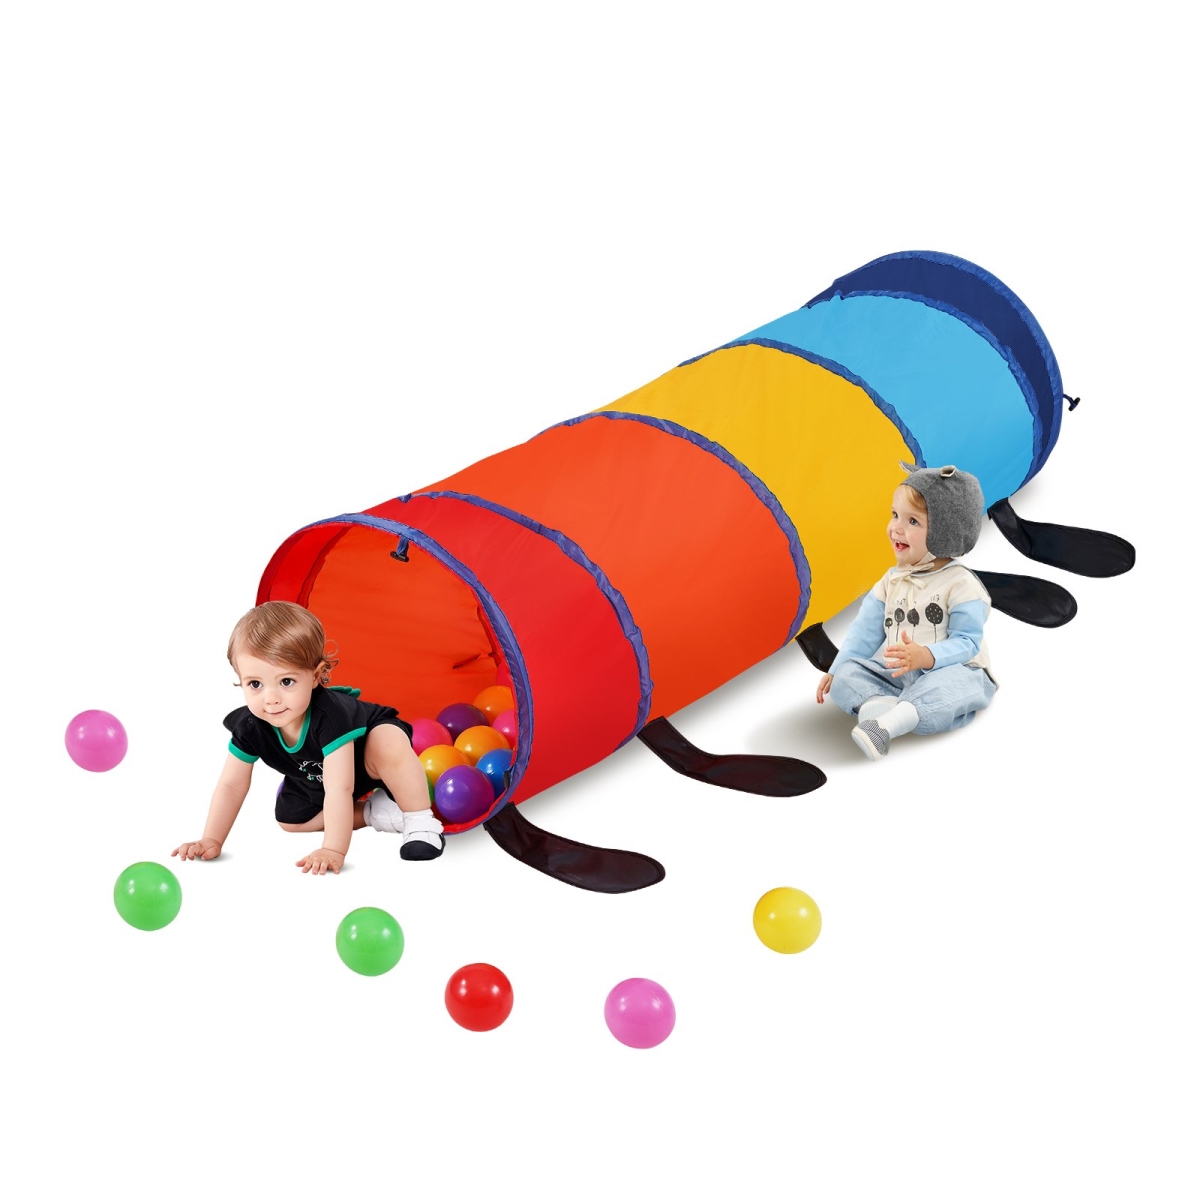 Picture of Vevor PPSDDXX1DMMCZRX6VV0 Kids Play Tunnel Tent for Toddlers&#44; Colorful Pop Up Caterpillar Crawl Tunnel Toy for Baby or Pet for Boy & Girl Play Tunnel Indoor & Outdoor Game&#44; Multi Color